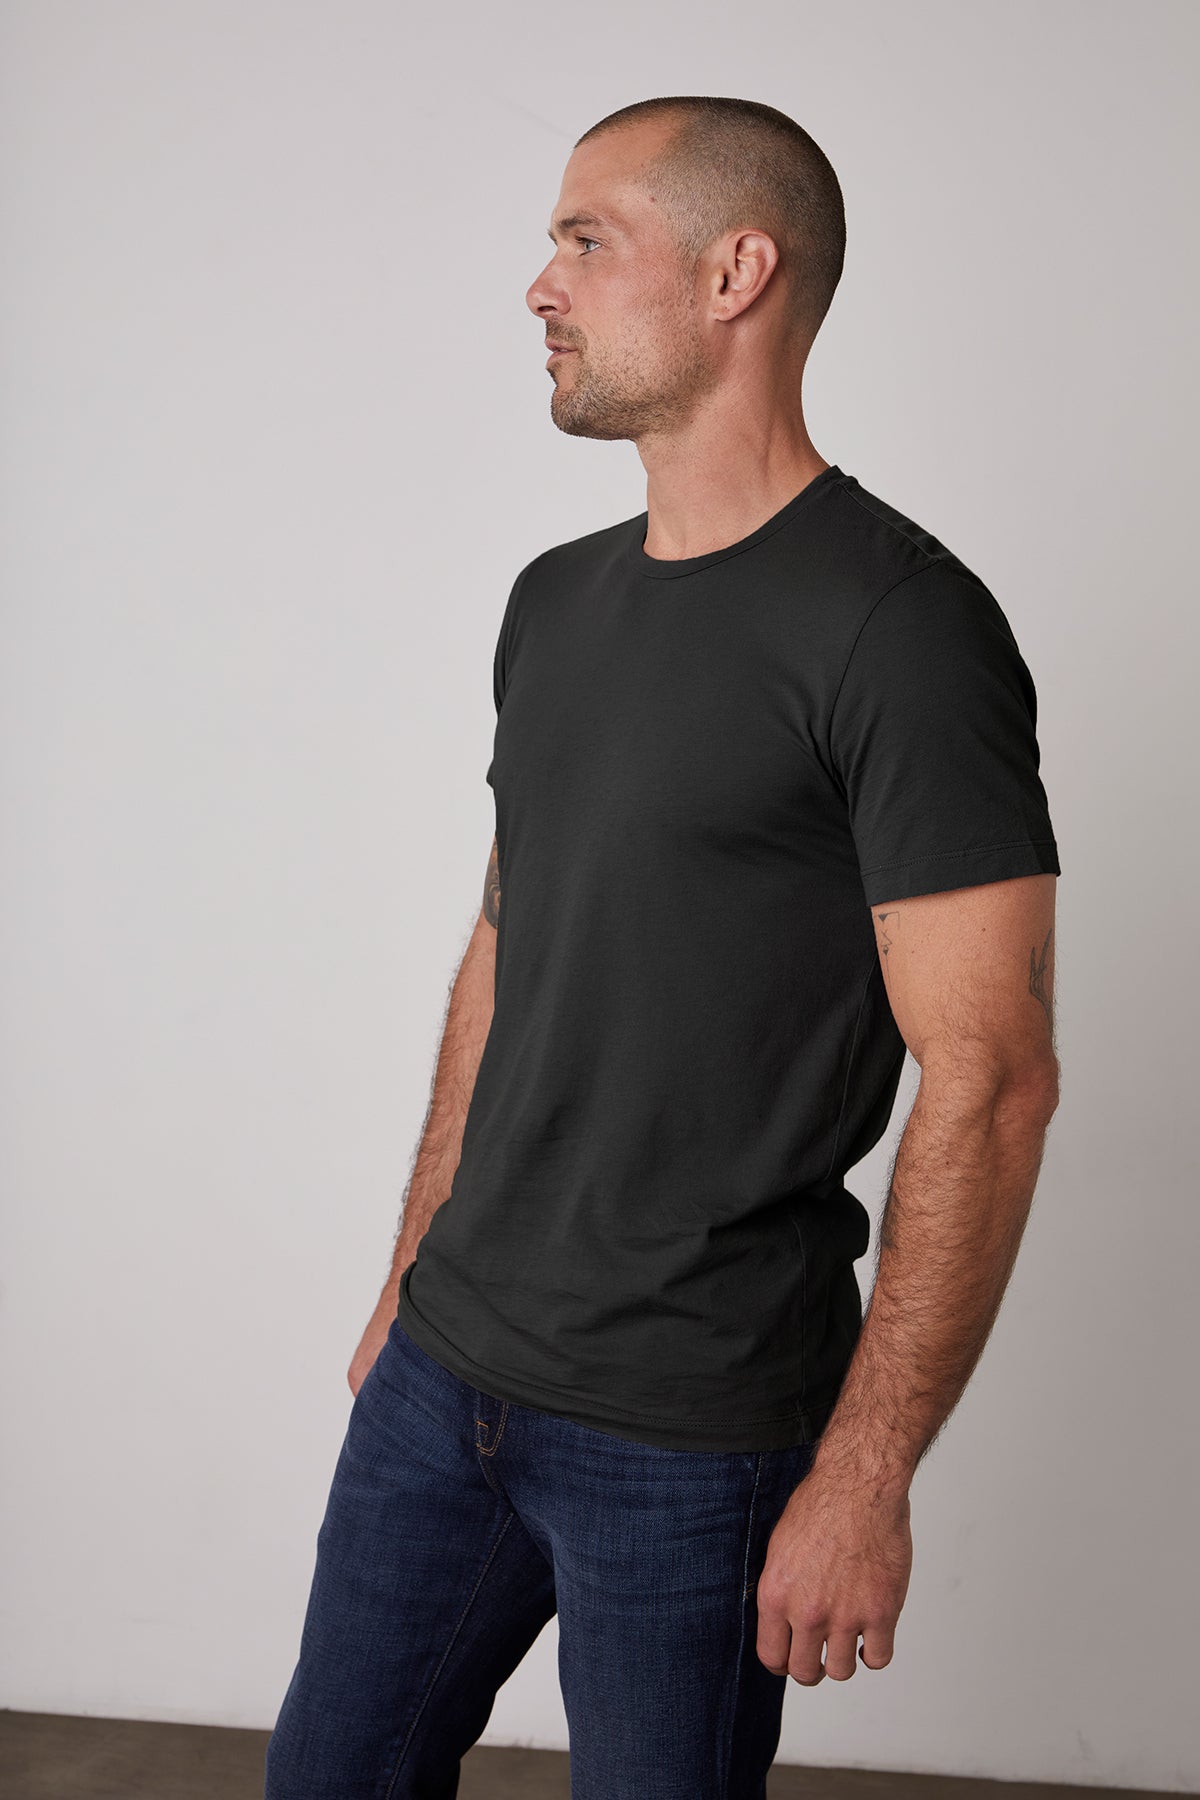 howard crew neck tee in exhaust side and front-24792243863745